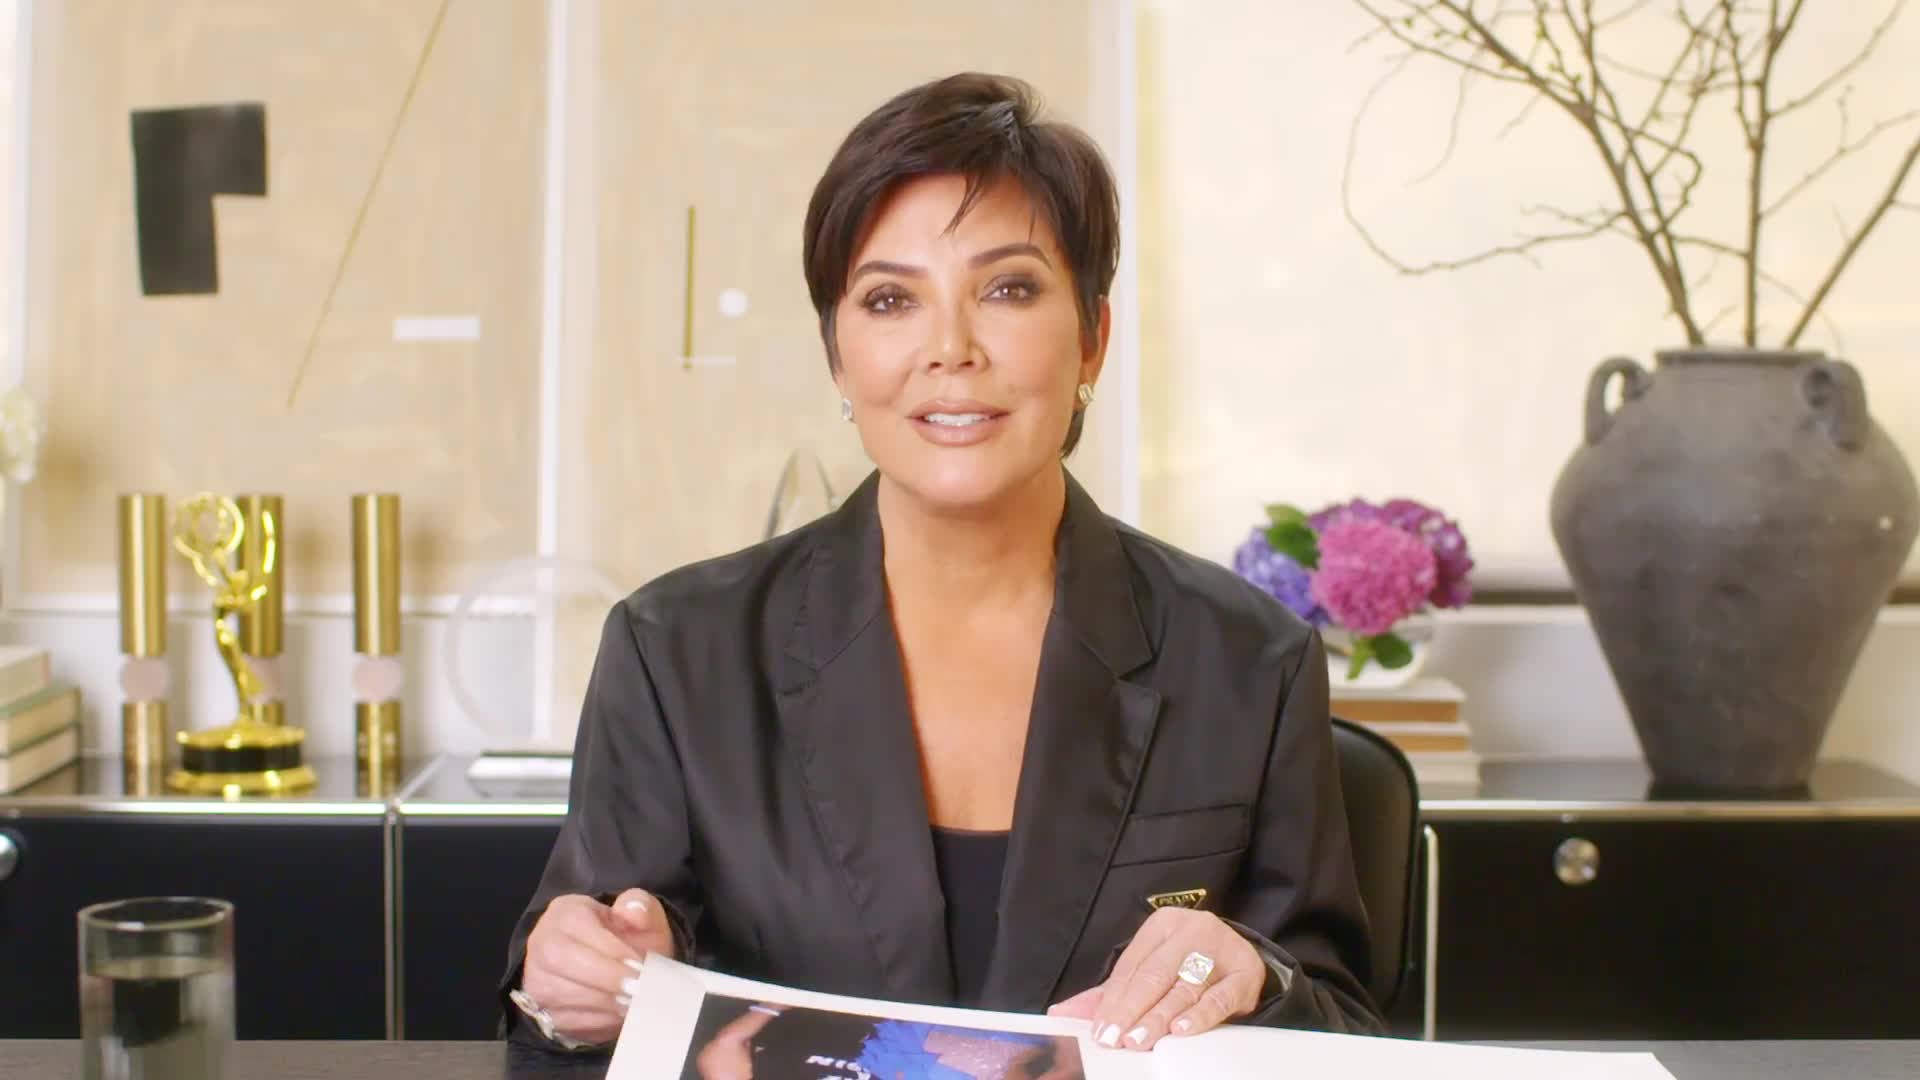 Watch Kris Jenner on Her Chanel Obsession and Which Daughter's